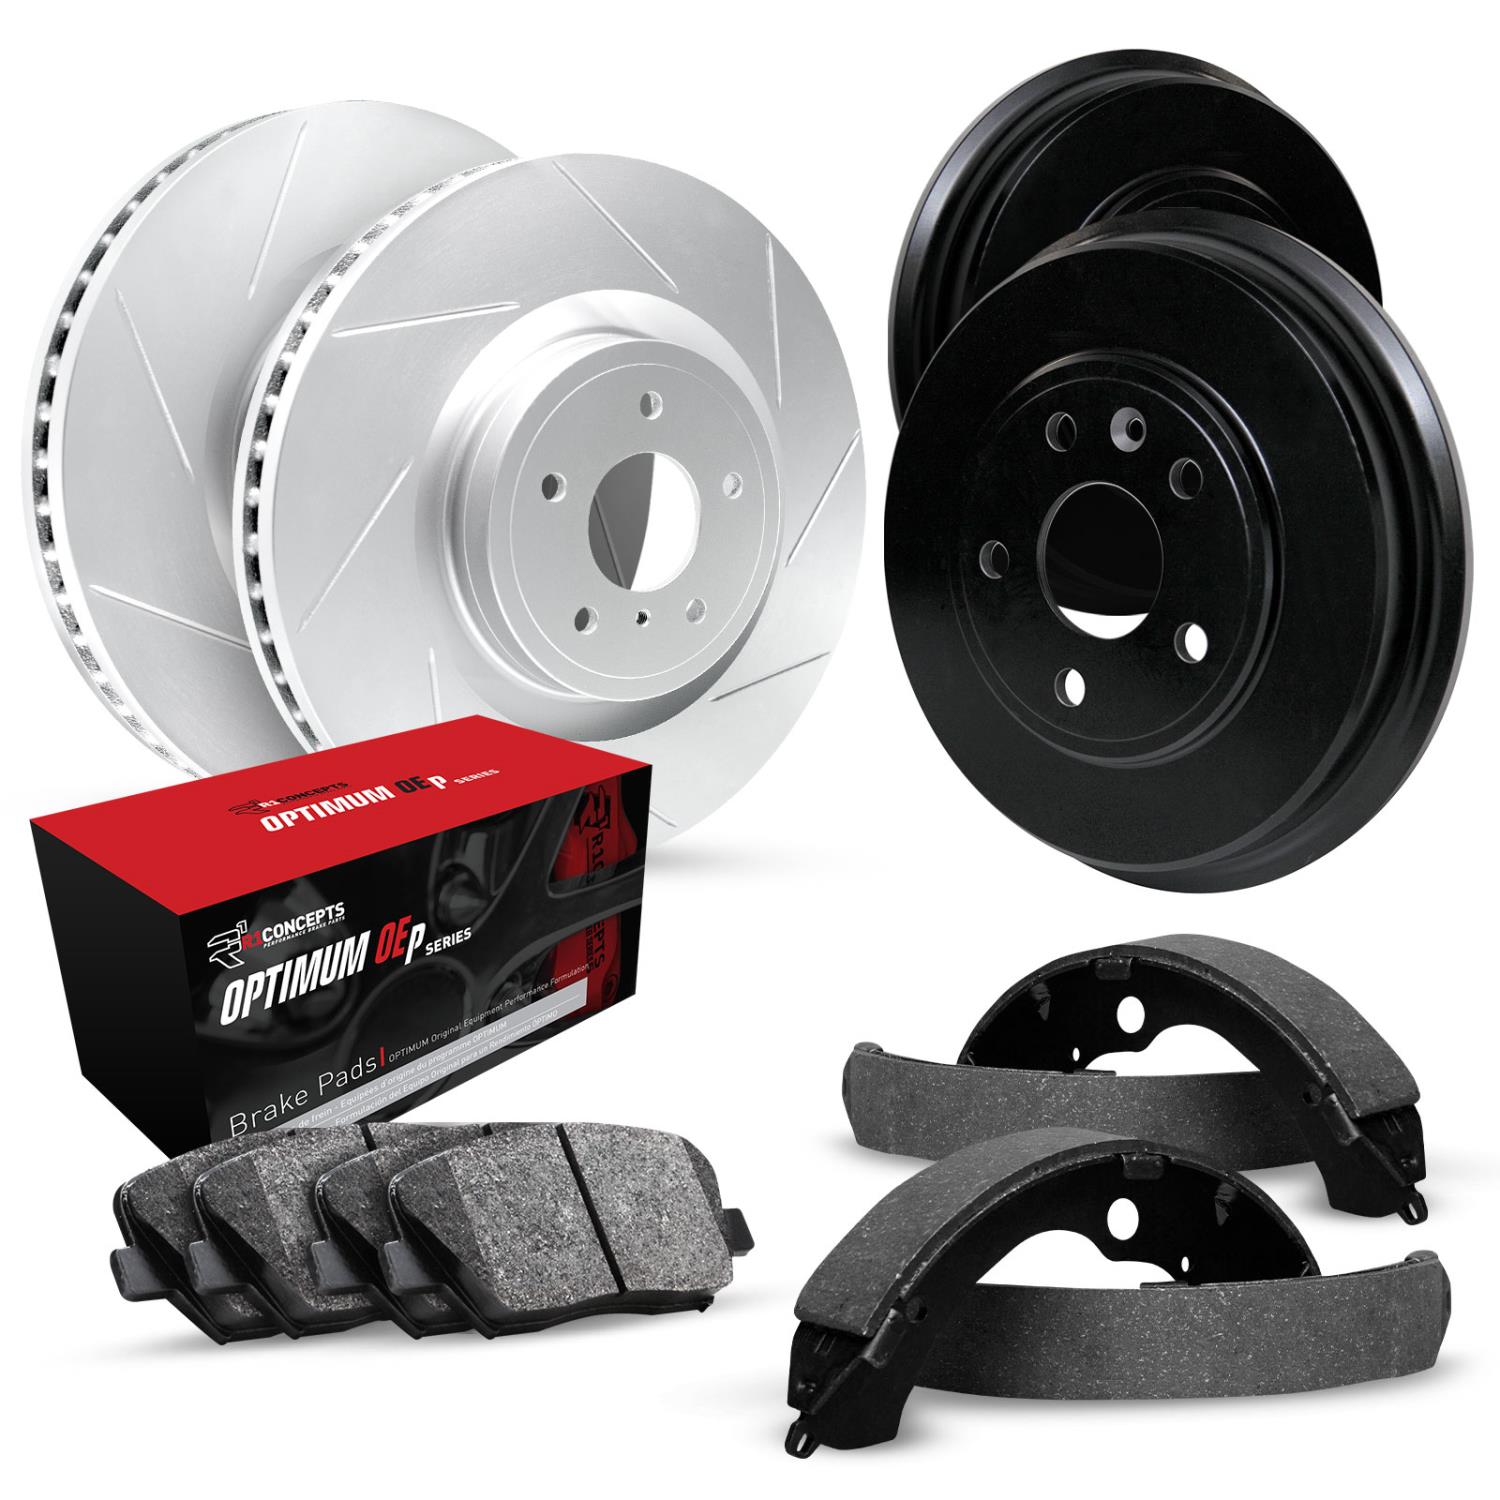 GEO-Carbon Slotted Brake Rotor & Drum Set w/Optimum OE Pads & Shoes, 2005-2007 Ford/Lincoln/Mercury/Mazda